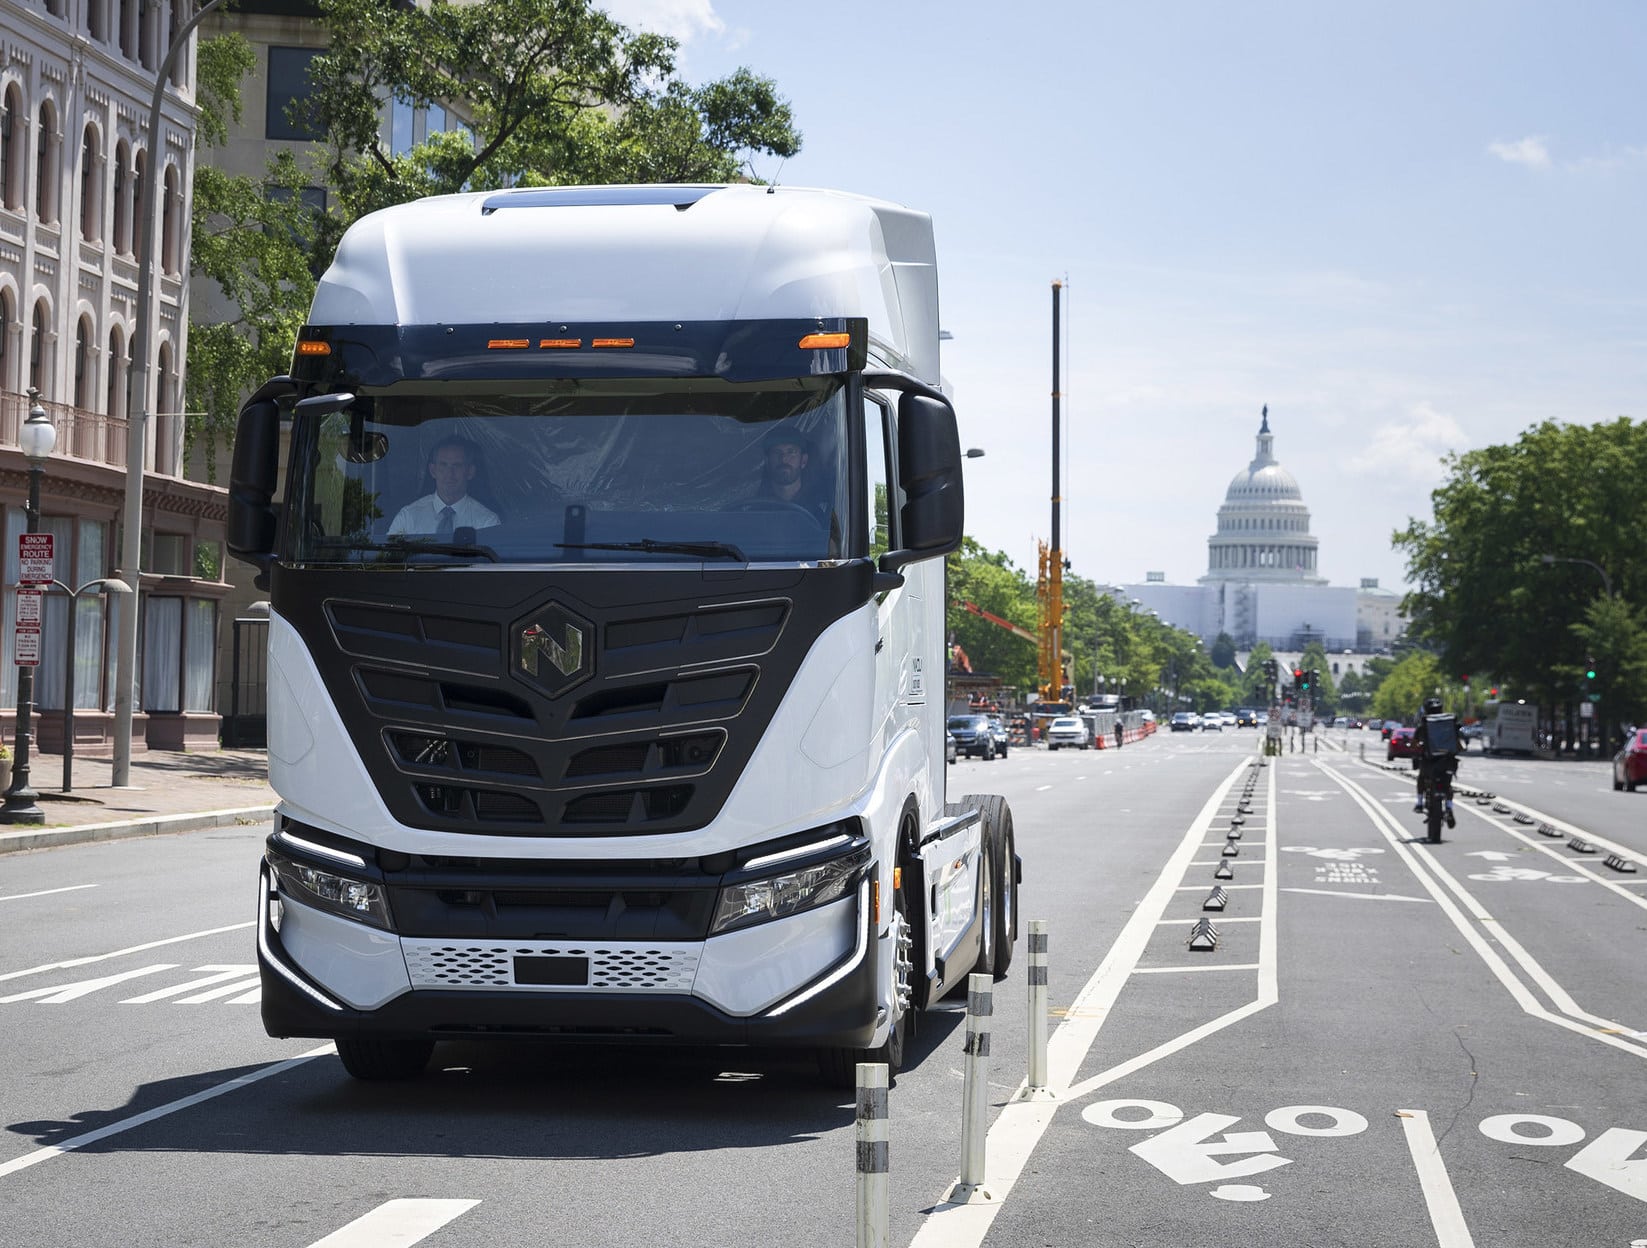 Nikola Highlights Benefits to Integrated Truck and Energy Business Model from The Inflation Reduction Act